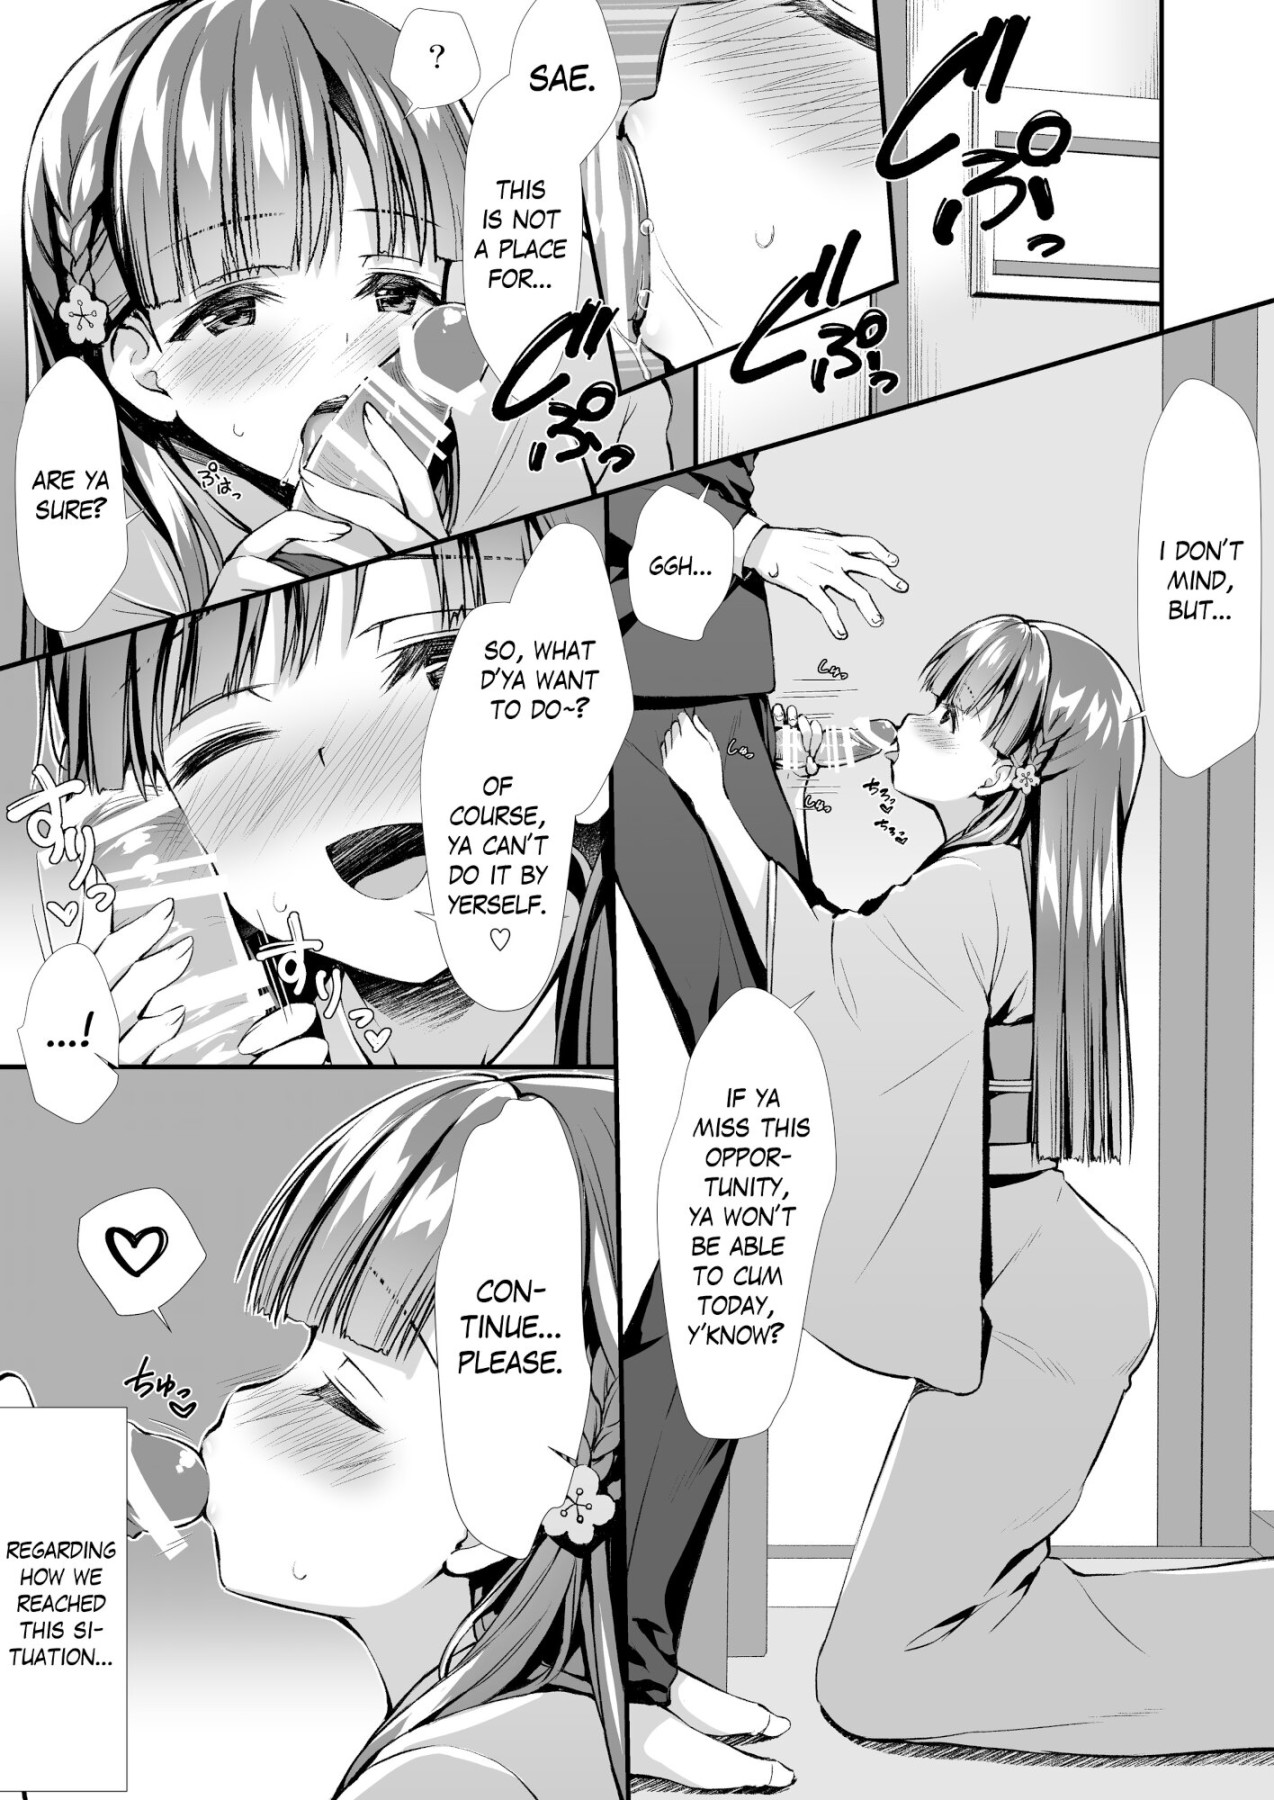 Hentai Manga Comic-A Book About Being Squeezed By Sae-han-Read-2